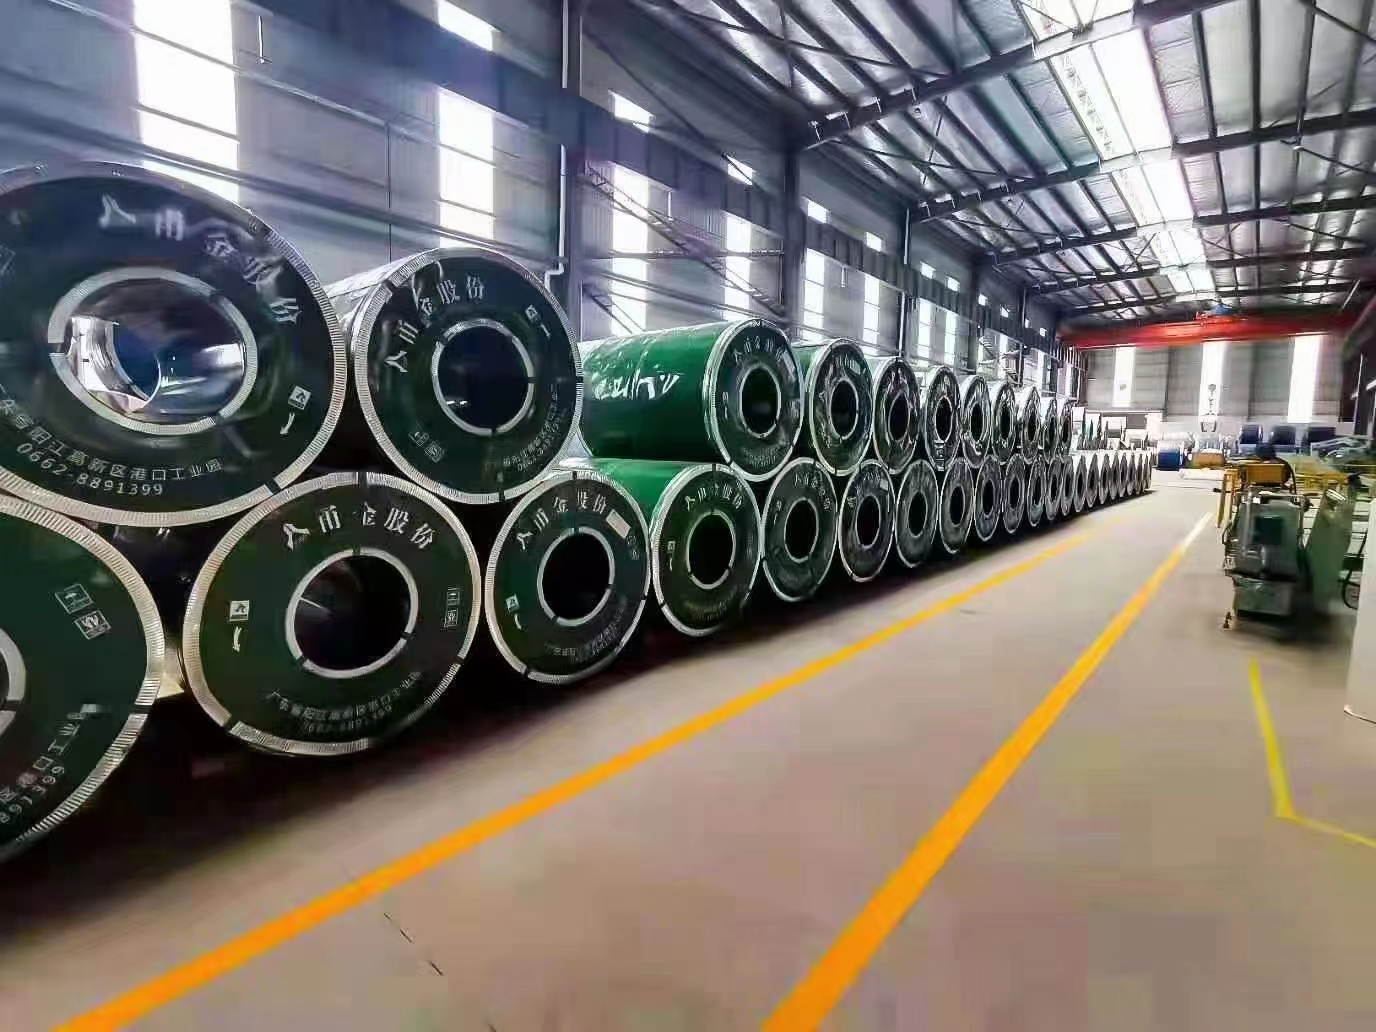 Customized Cold Rolled Stainless Steel Roll 316 409 410 420 430 201 202 304l 304 Stainless Steel Coil